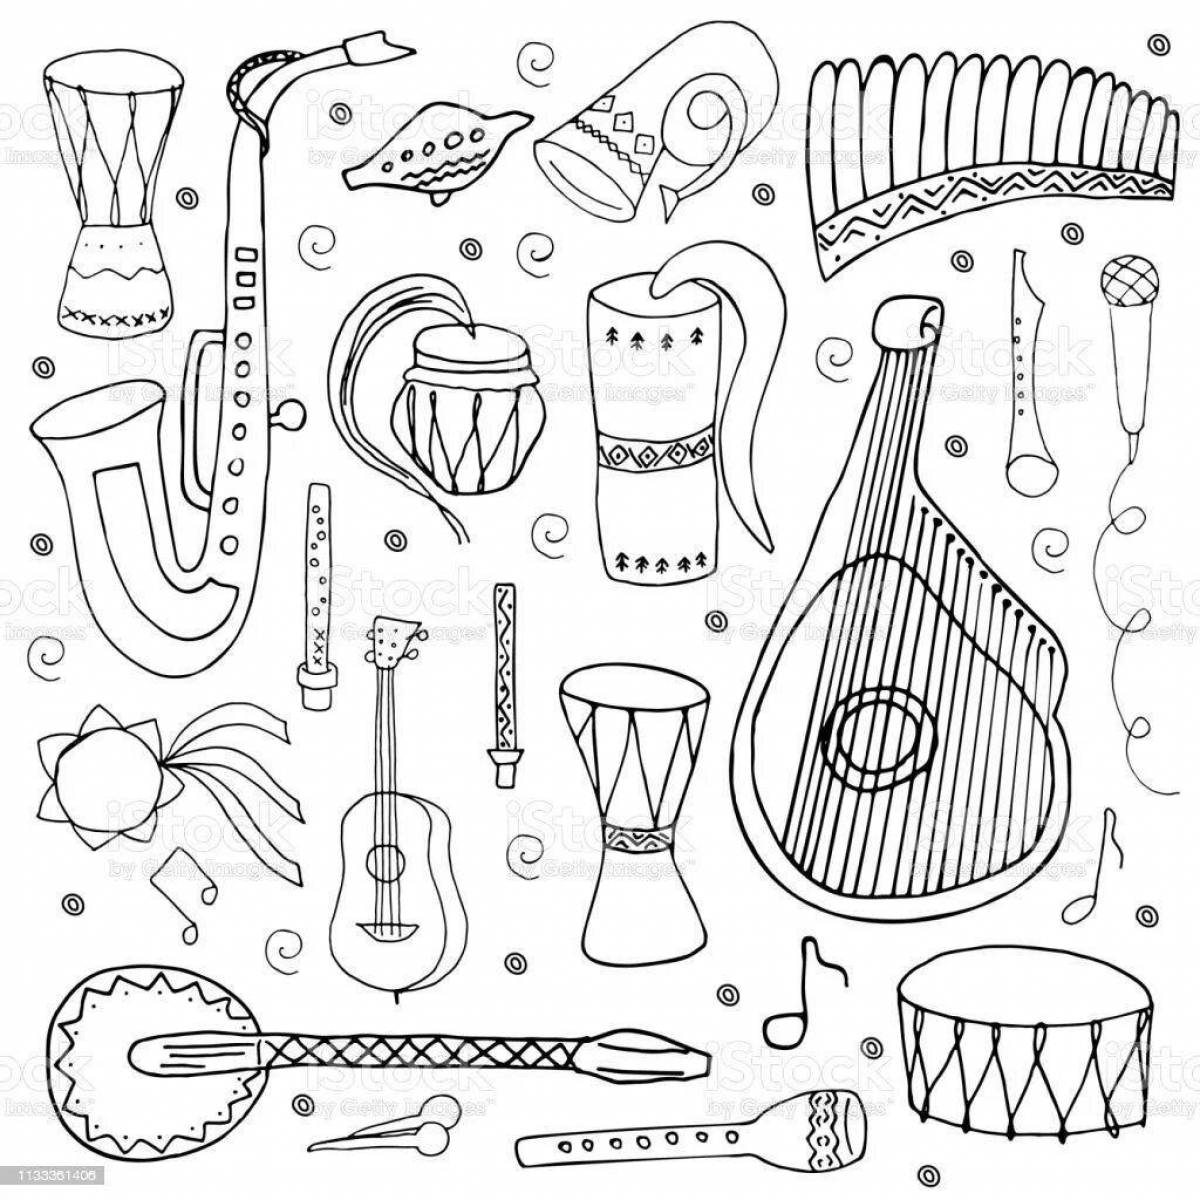 Inspiring folk musical instruments coloring pages for kids